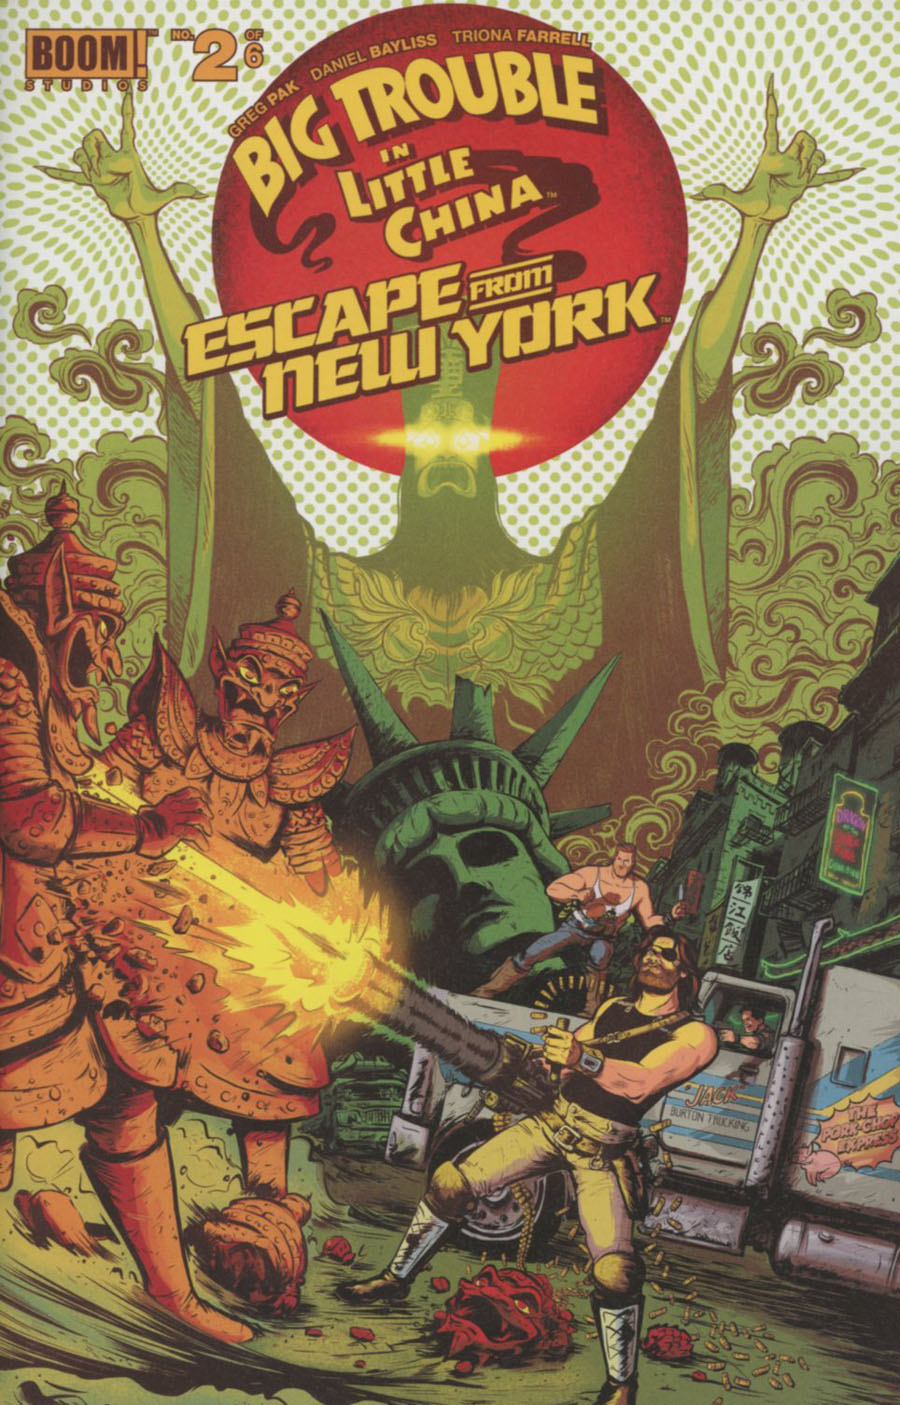 Big Trouble In Little China Escape From New York #2 Cover A Regular Daniel Bayliss Wraparound Cover